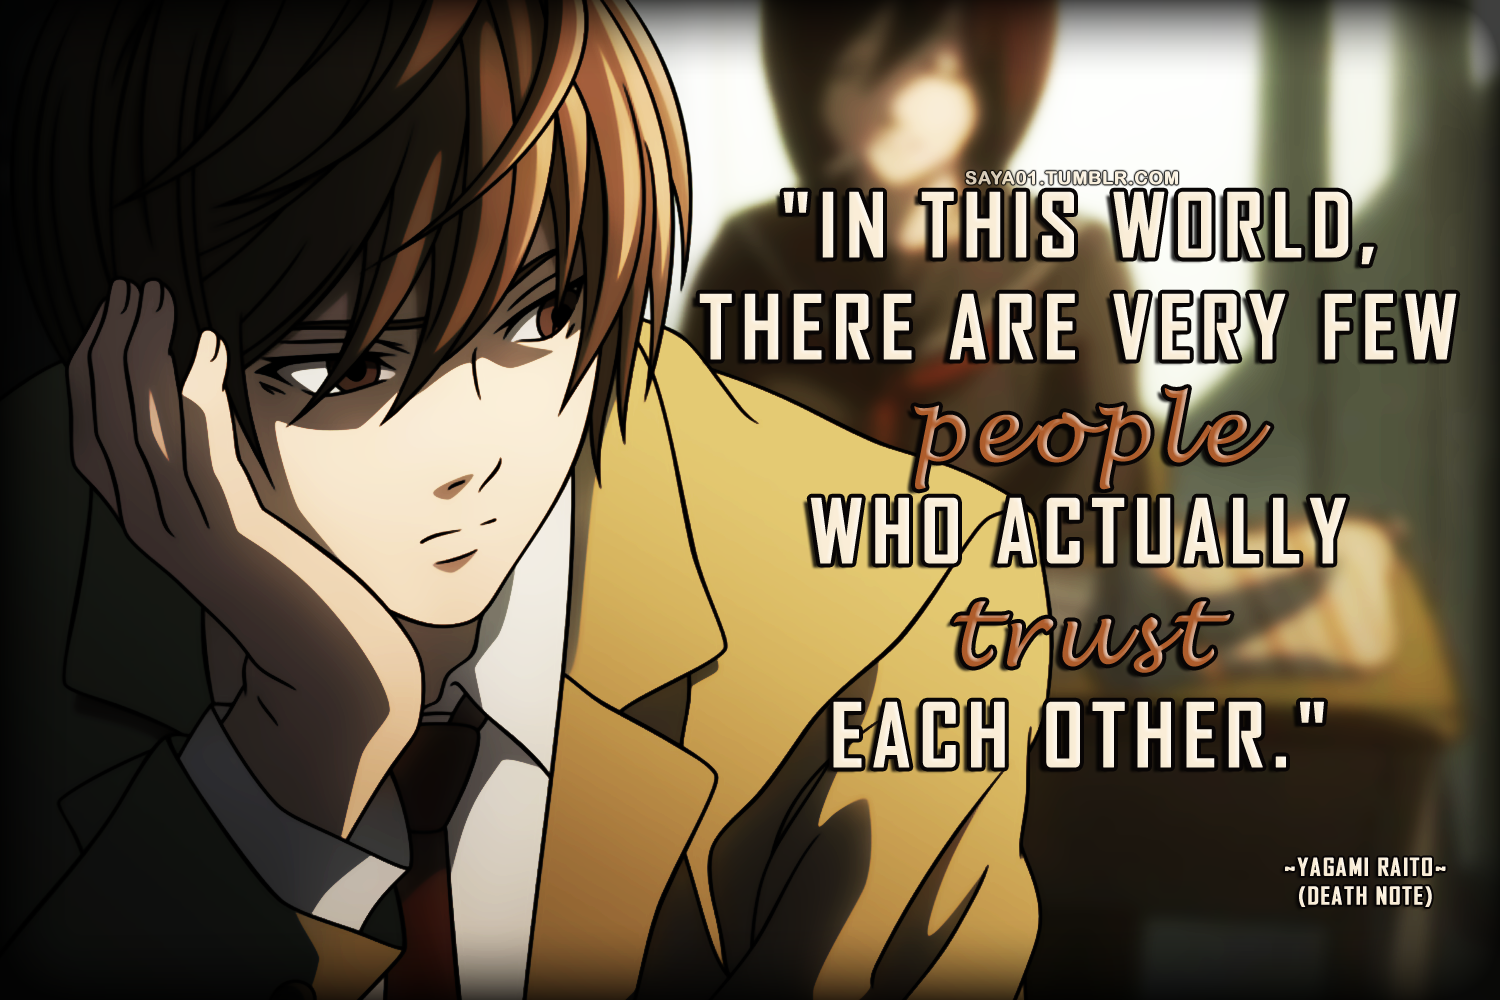 Death Note Yagami Raito 2 Advertisements anime anime quotes